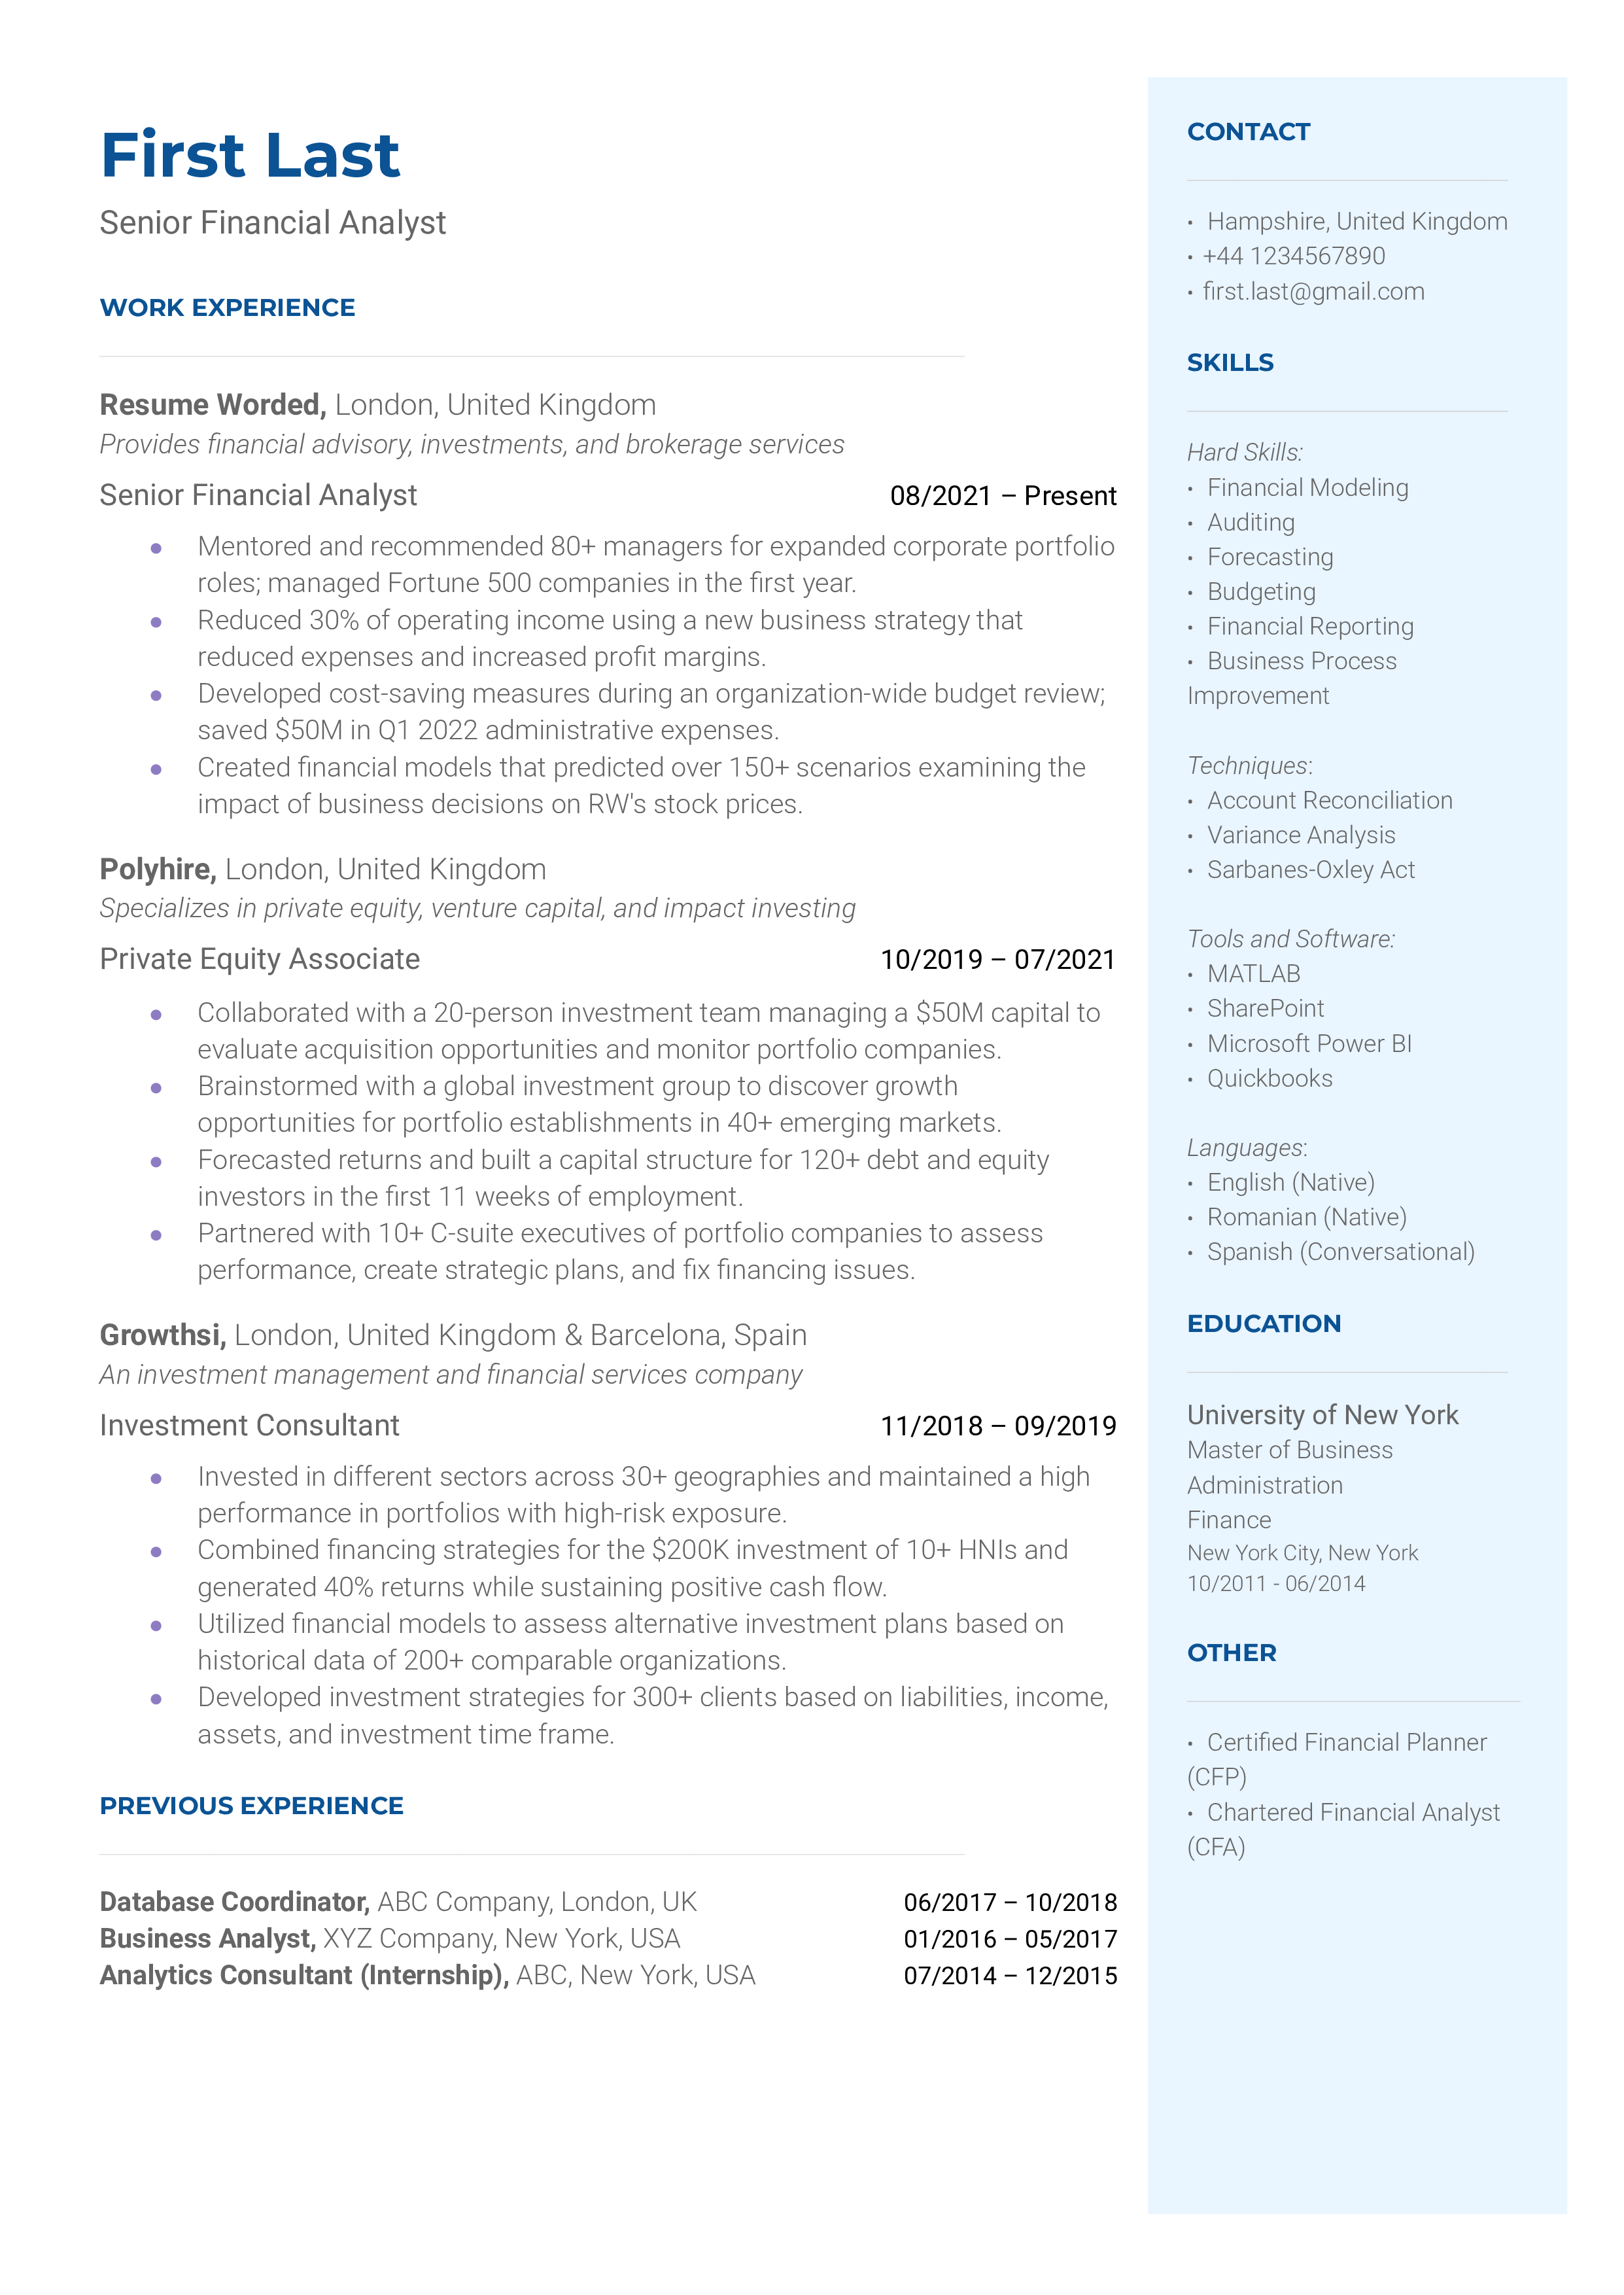 A targeted CV demonstrating the qualifications and skills of a Senior Financial Analyst.